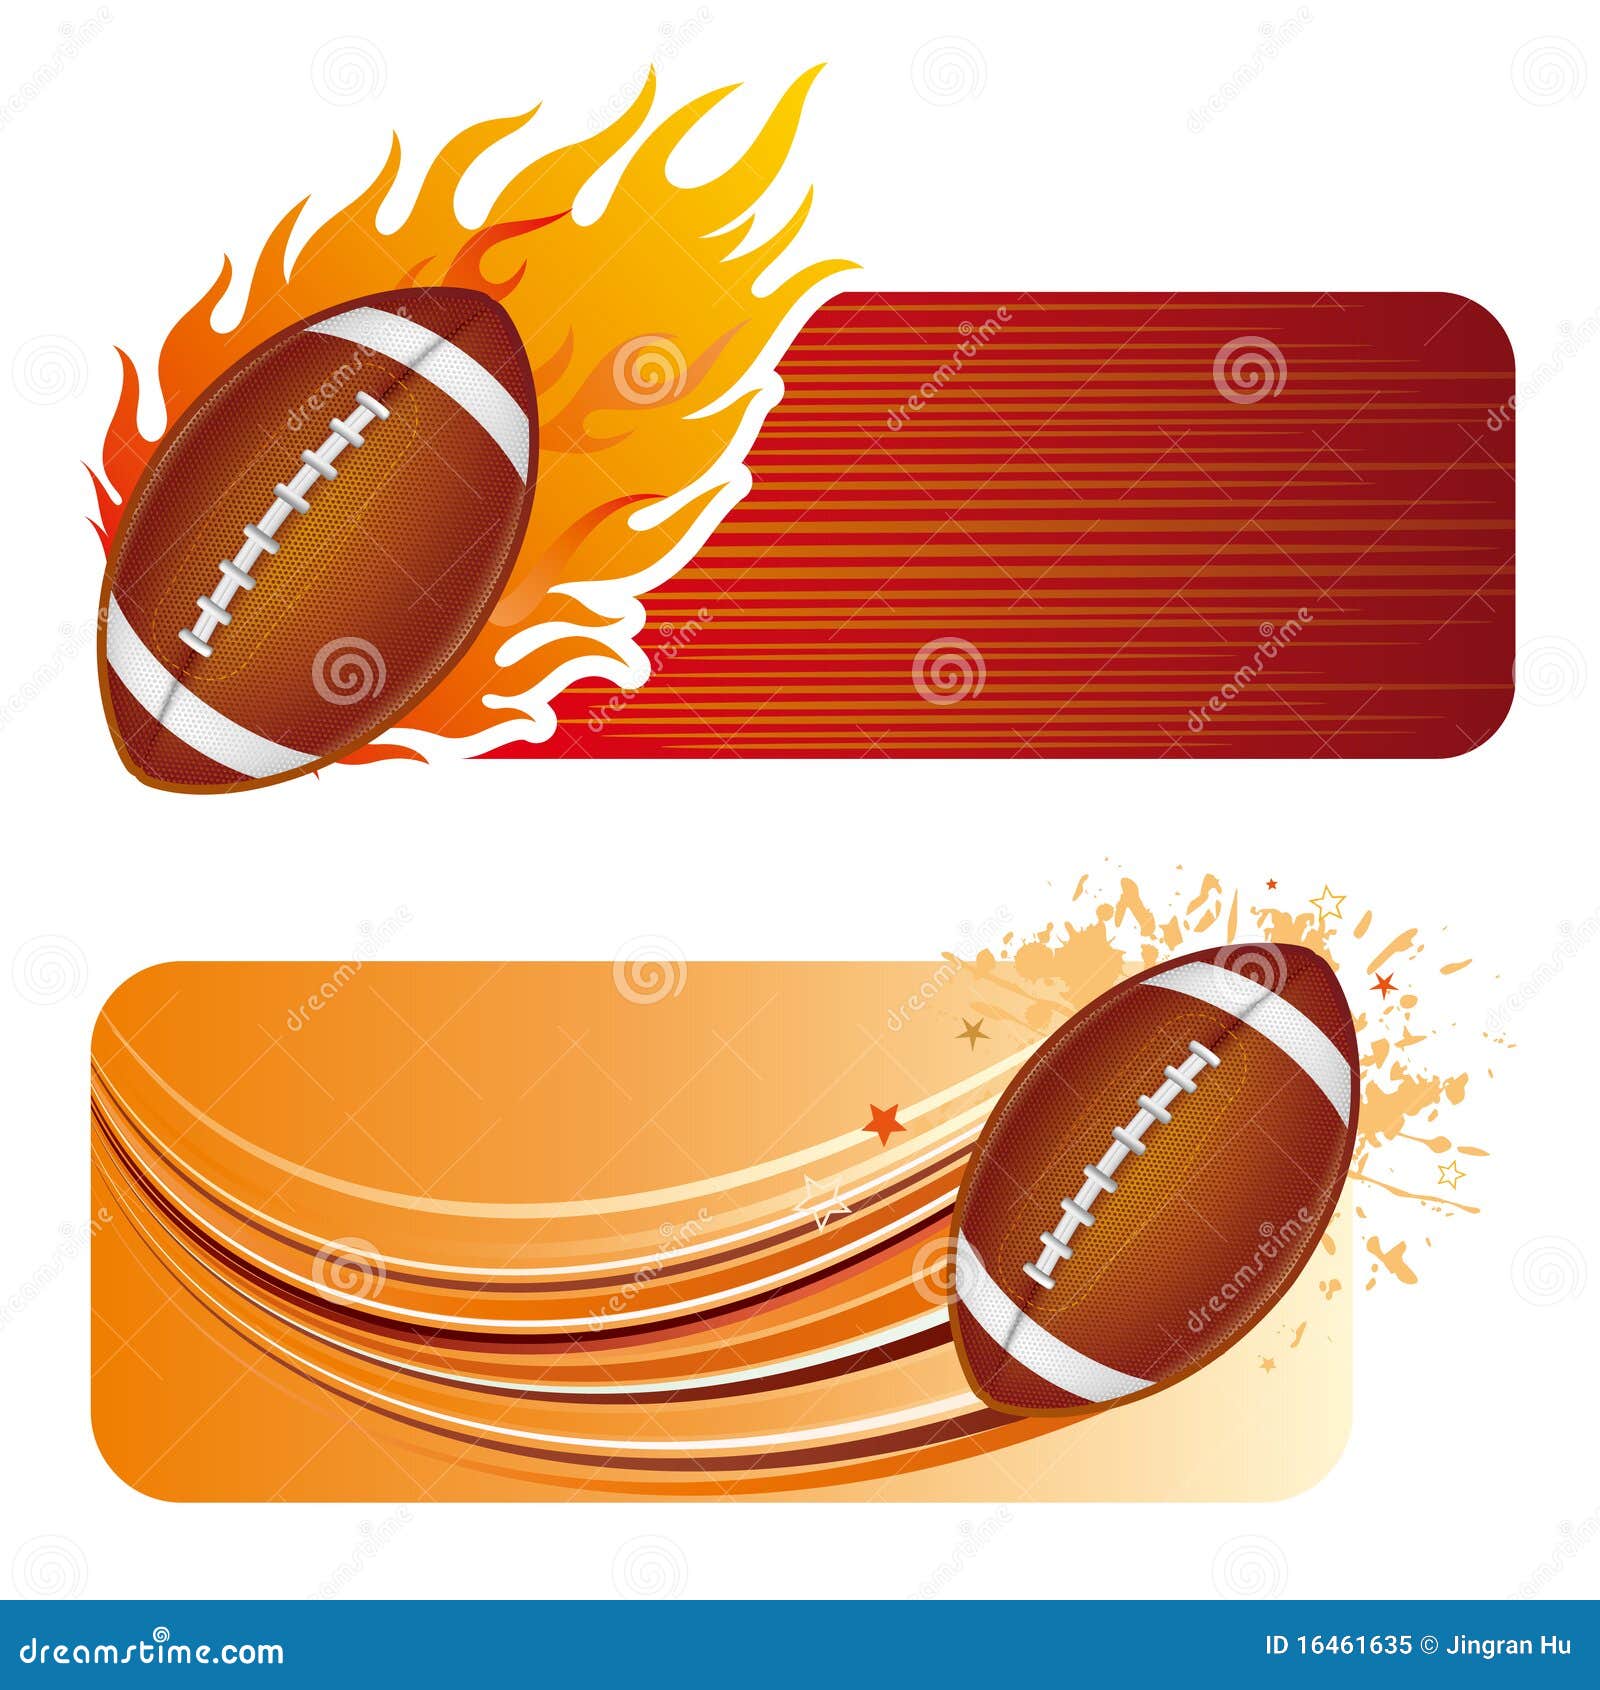 american football with flames